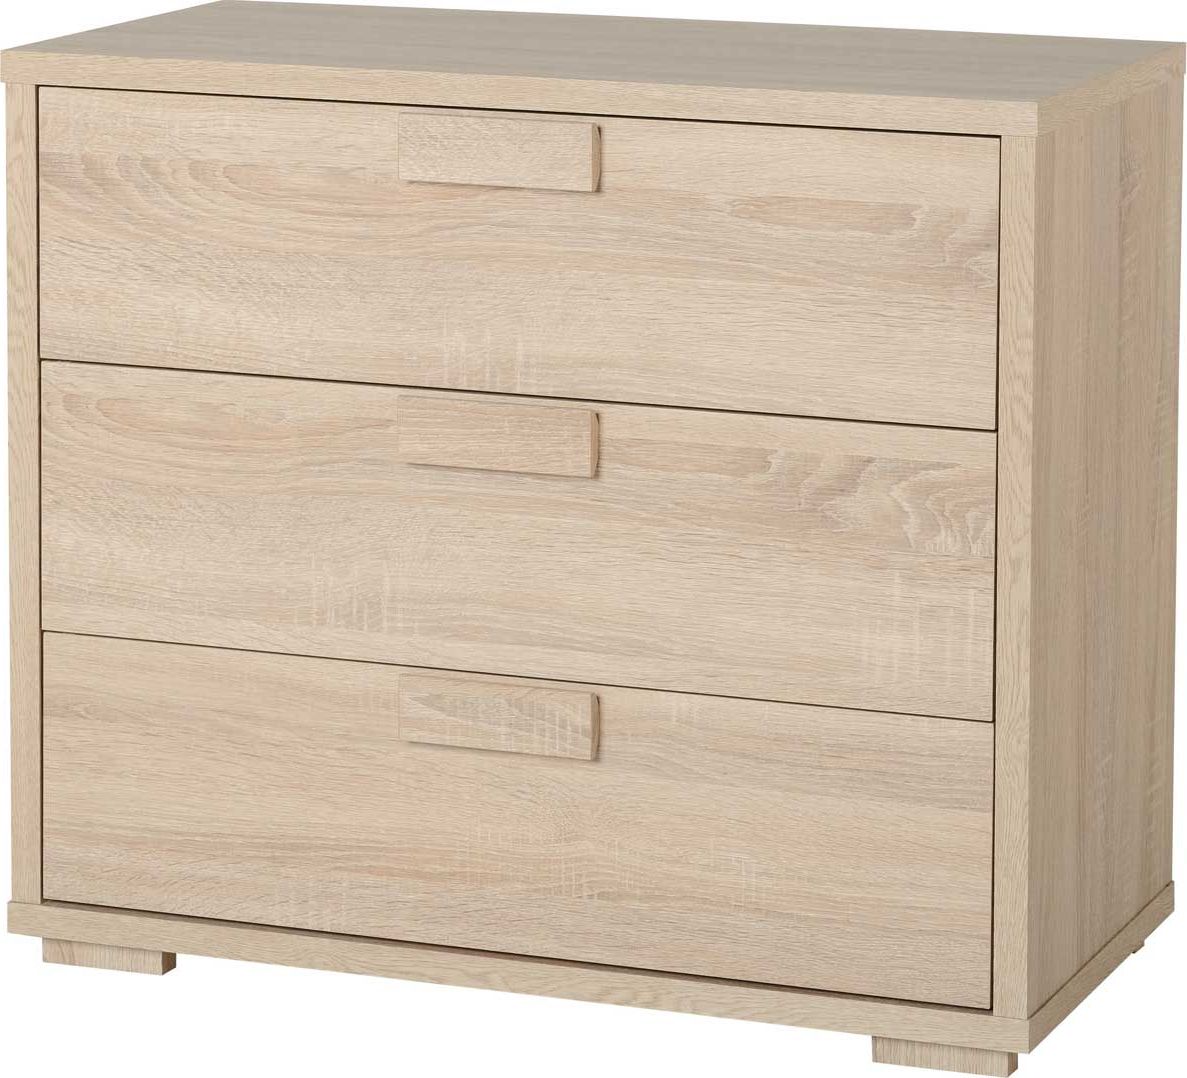 Seconique Cambourne 3 Drawer Chest Sonoma Oak Effect Within Cambourne Tv Stands (Gallery 8 of 20)